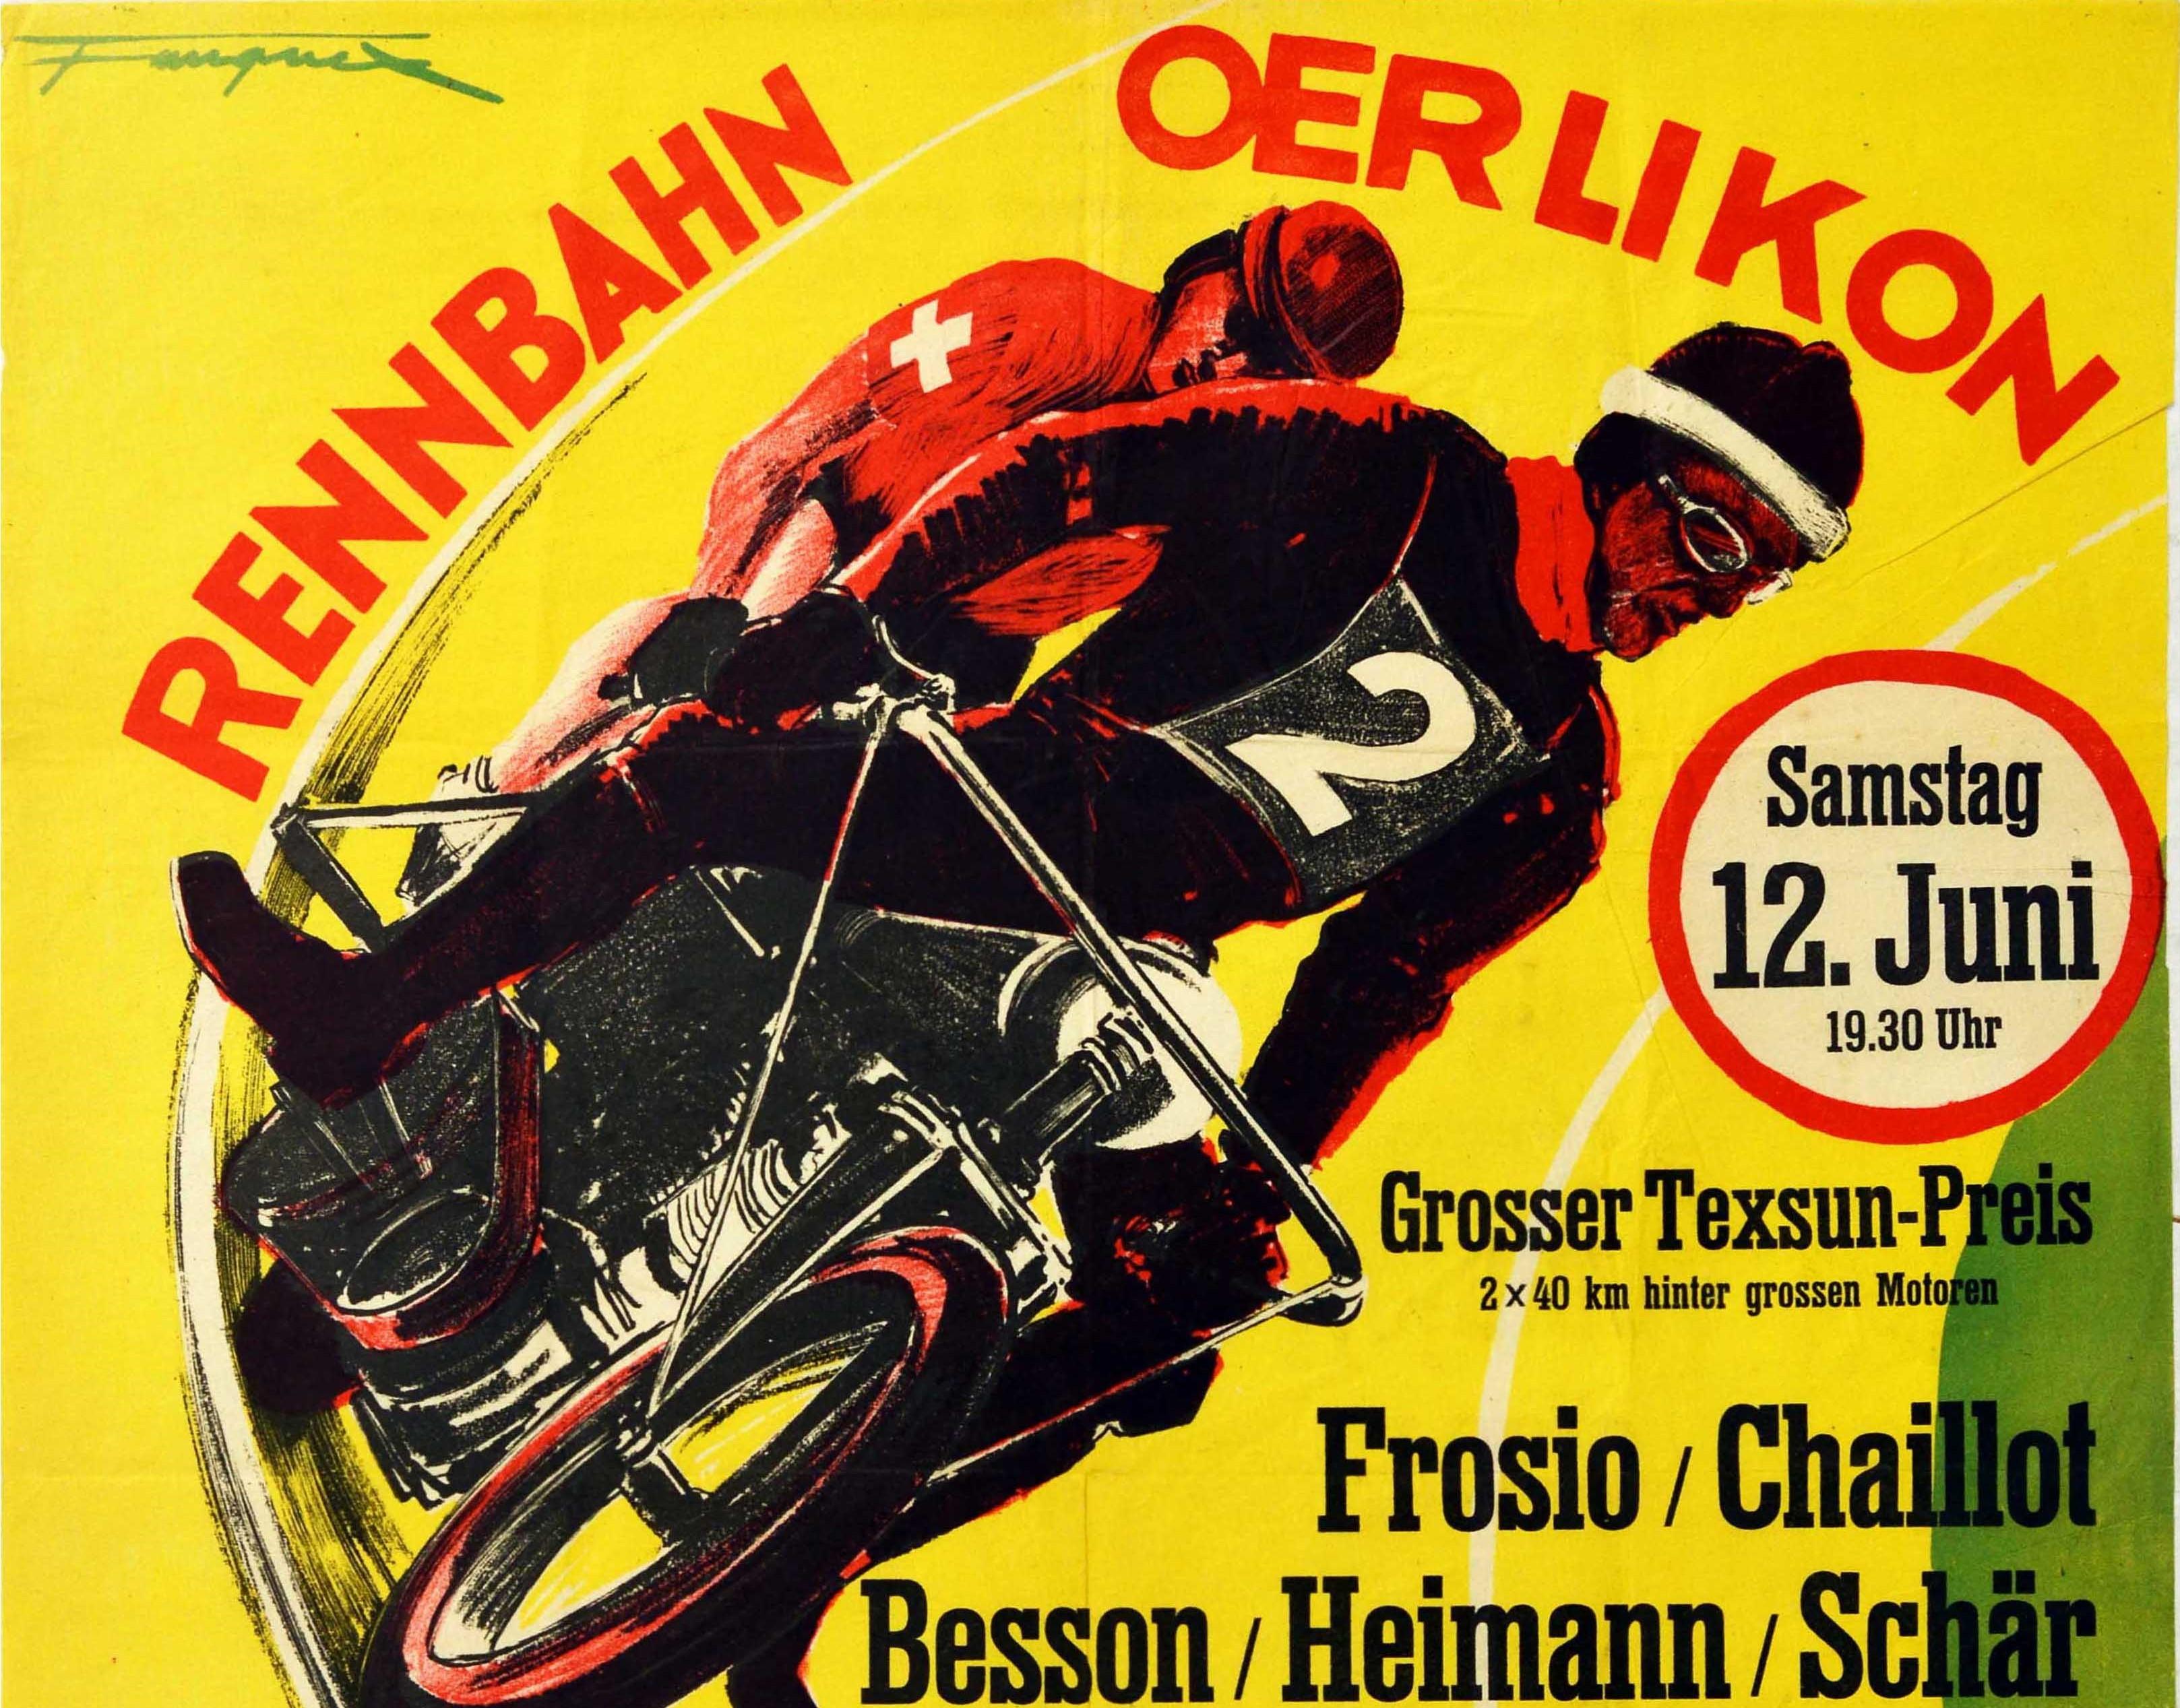 Original Vintage Auto Racing Poster Oerlikon Racecourse Motorcycle Sport Event - Print by Eugene Fauquex